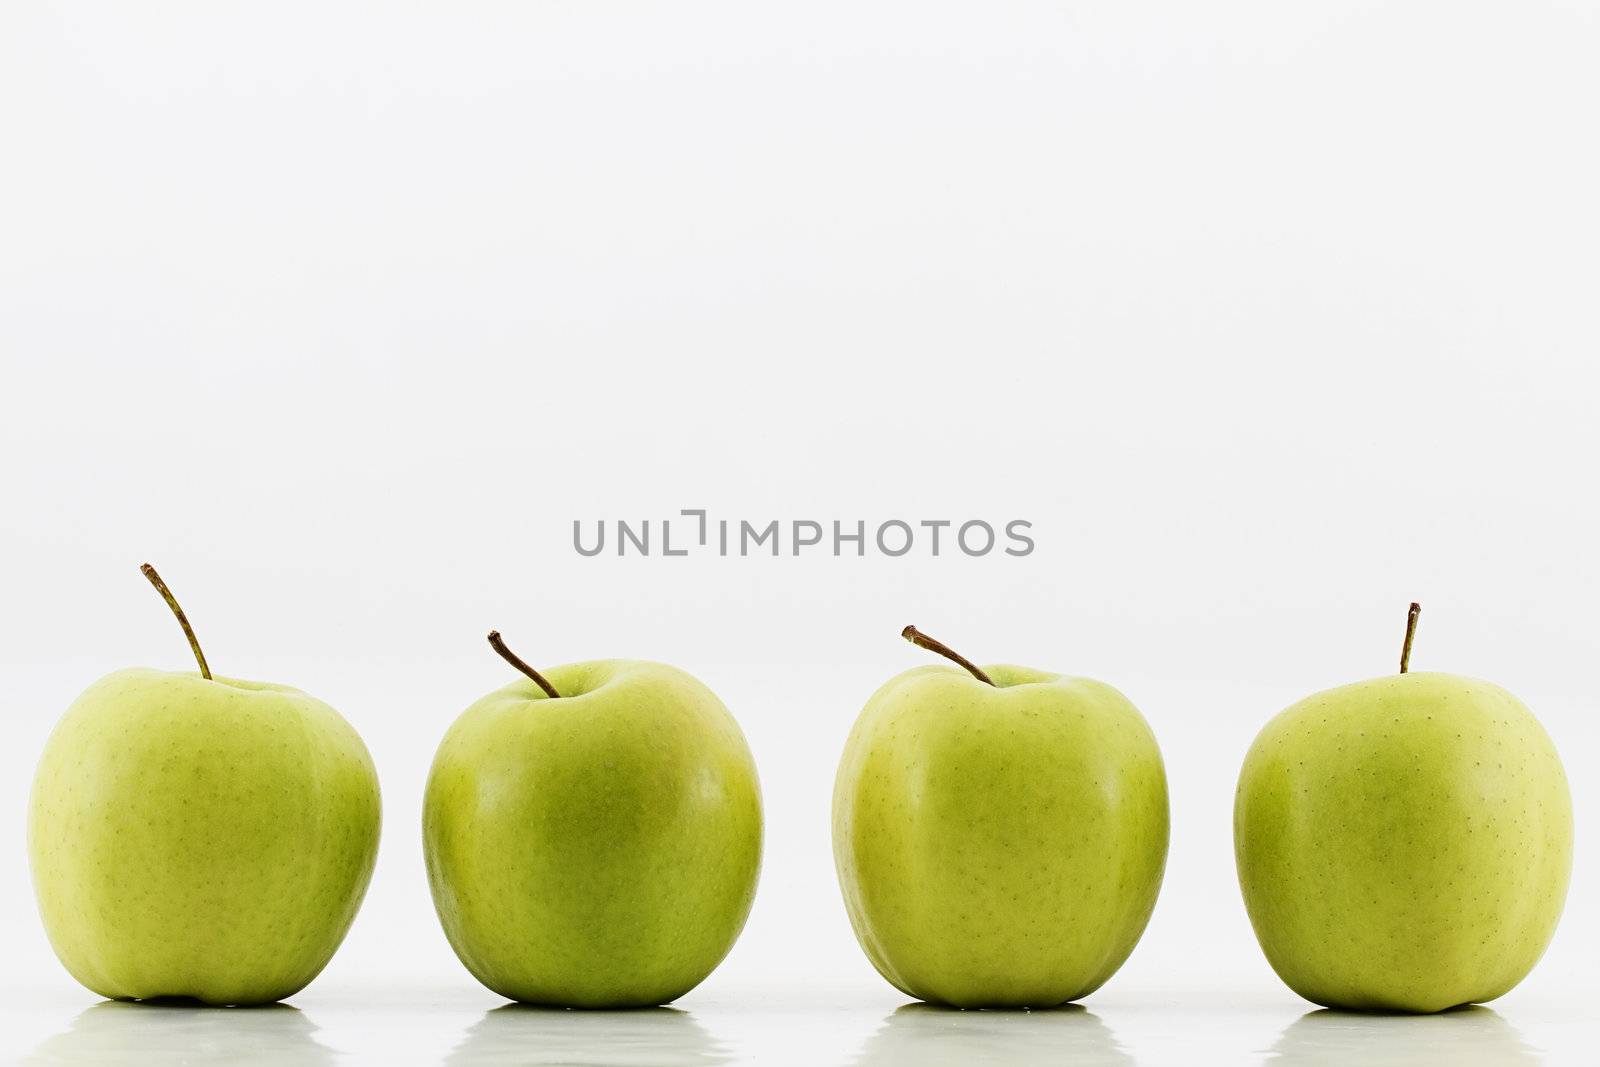 four green apples on white background